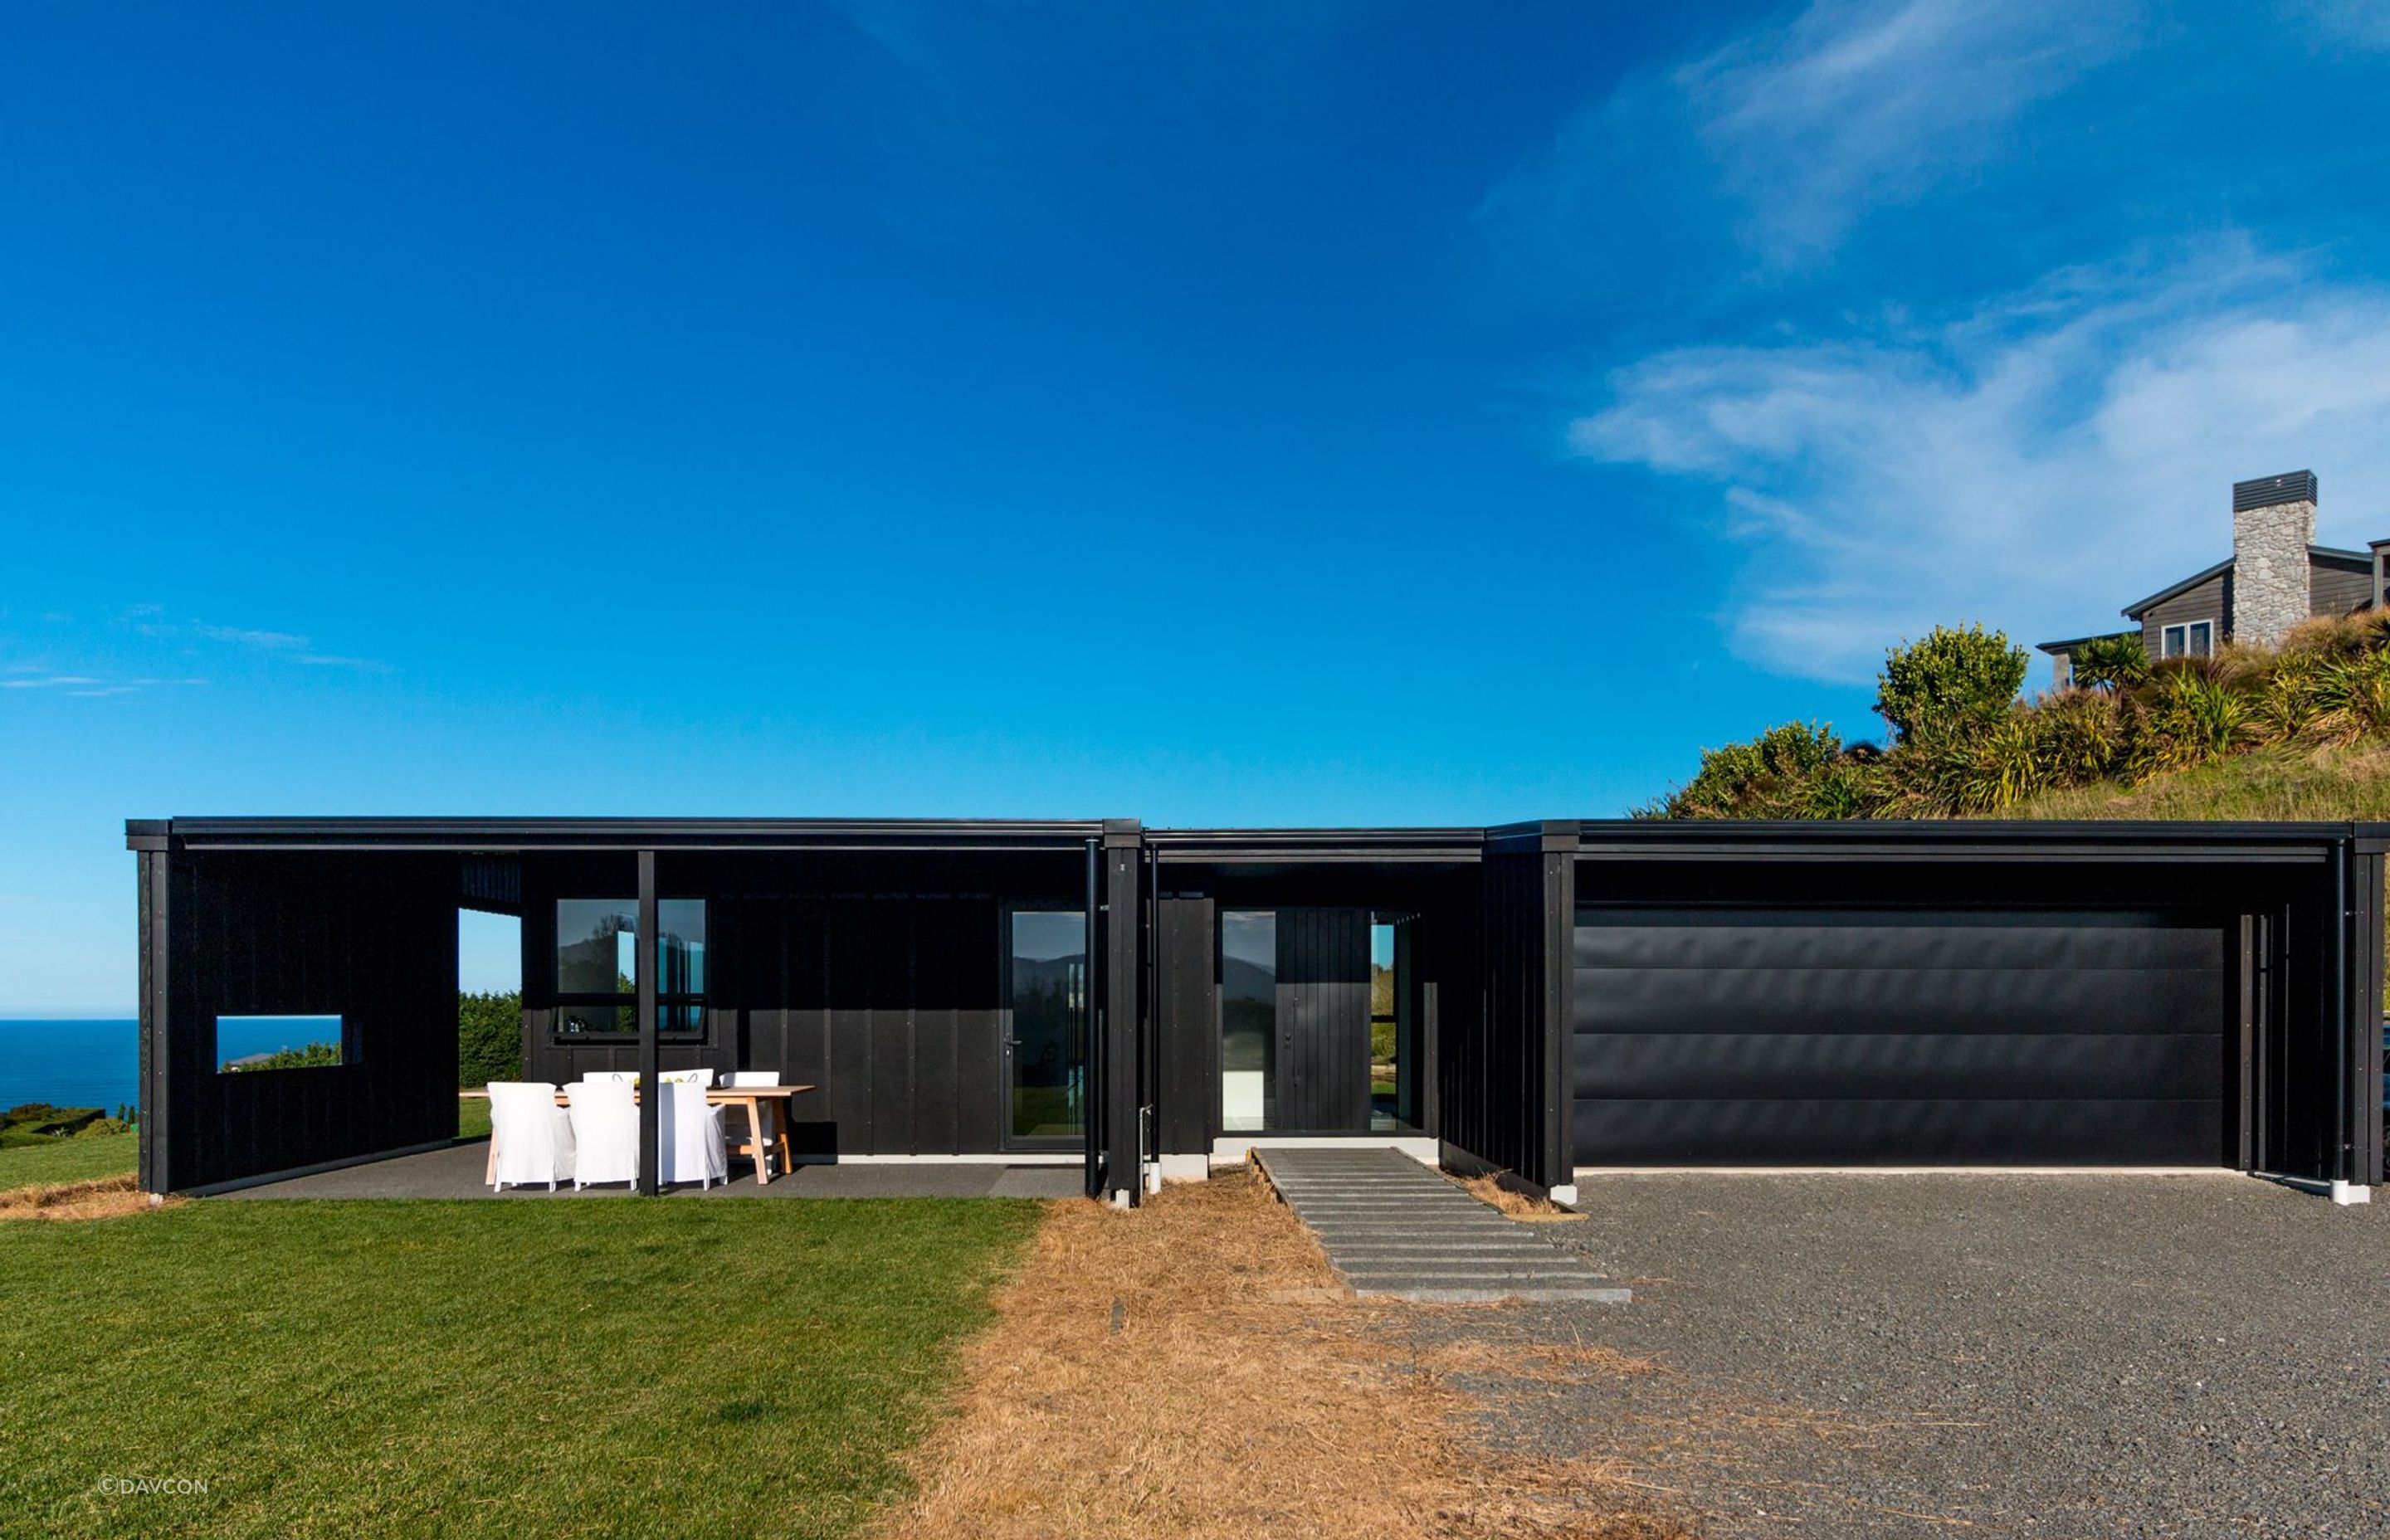 The bold, black cladding of the barn-style home on Heipipi Drive contrasts dramatically against the clear blue sky.